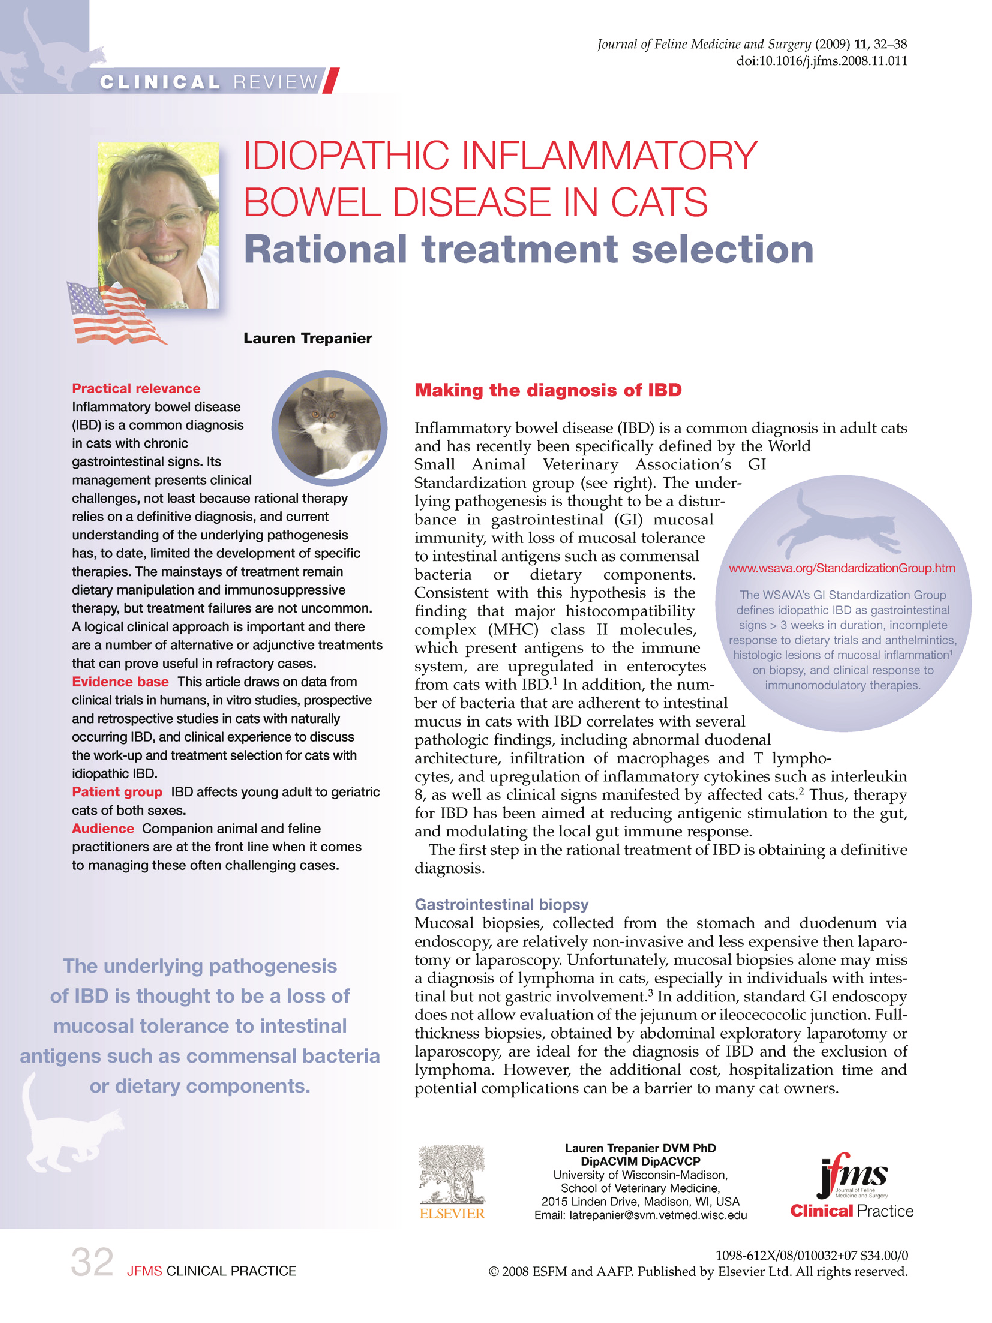 Idiopathic inflammatory bowel disease in cats: Rational treatment selection